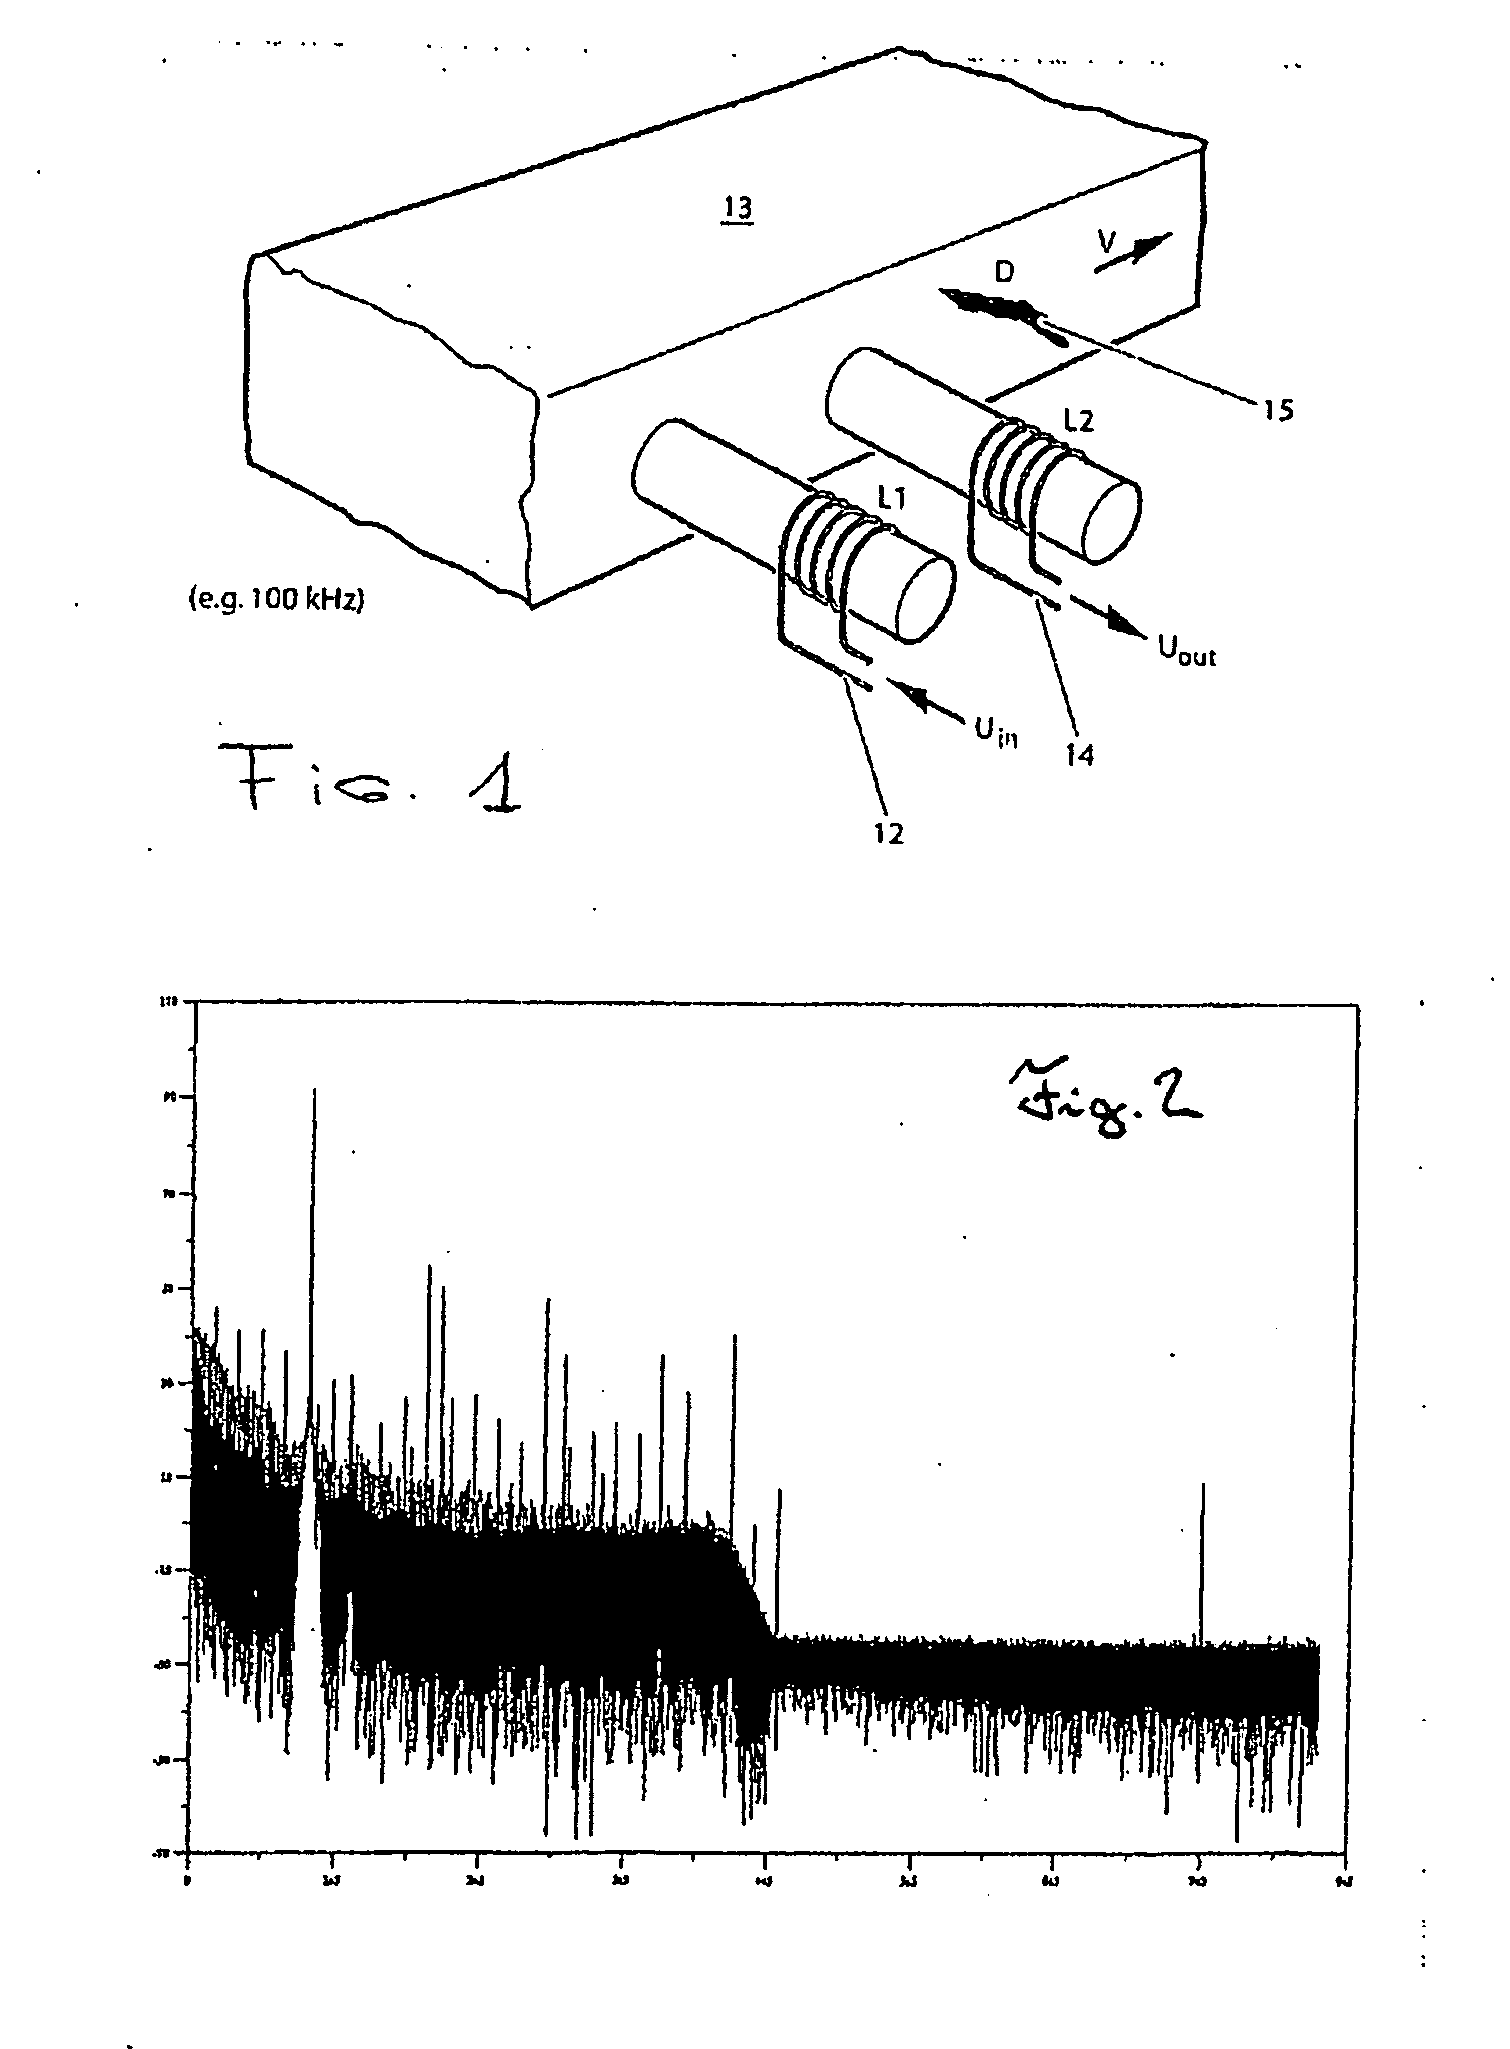 Device and Method for Detecting Flaws on Objects or Locating Metallic Objects